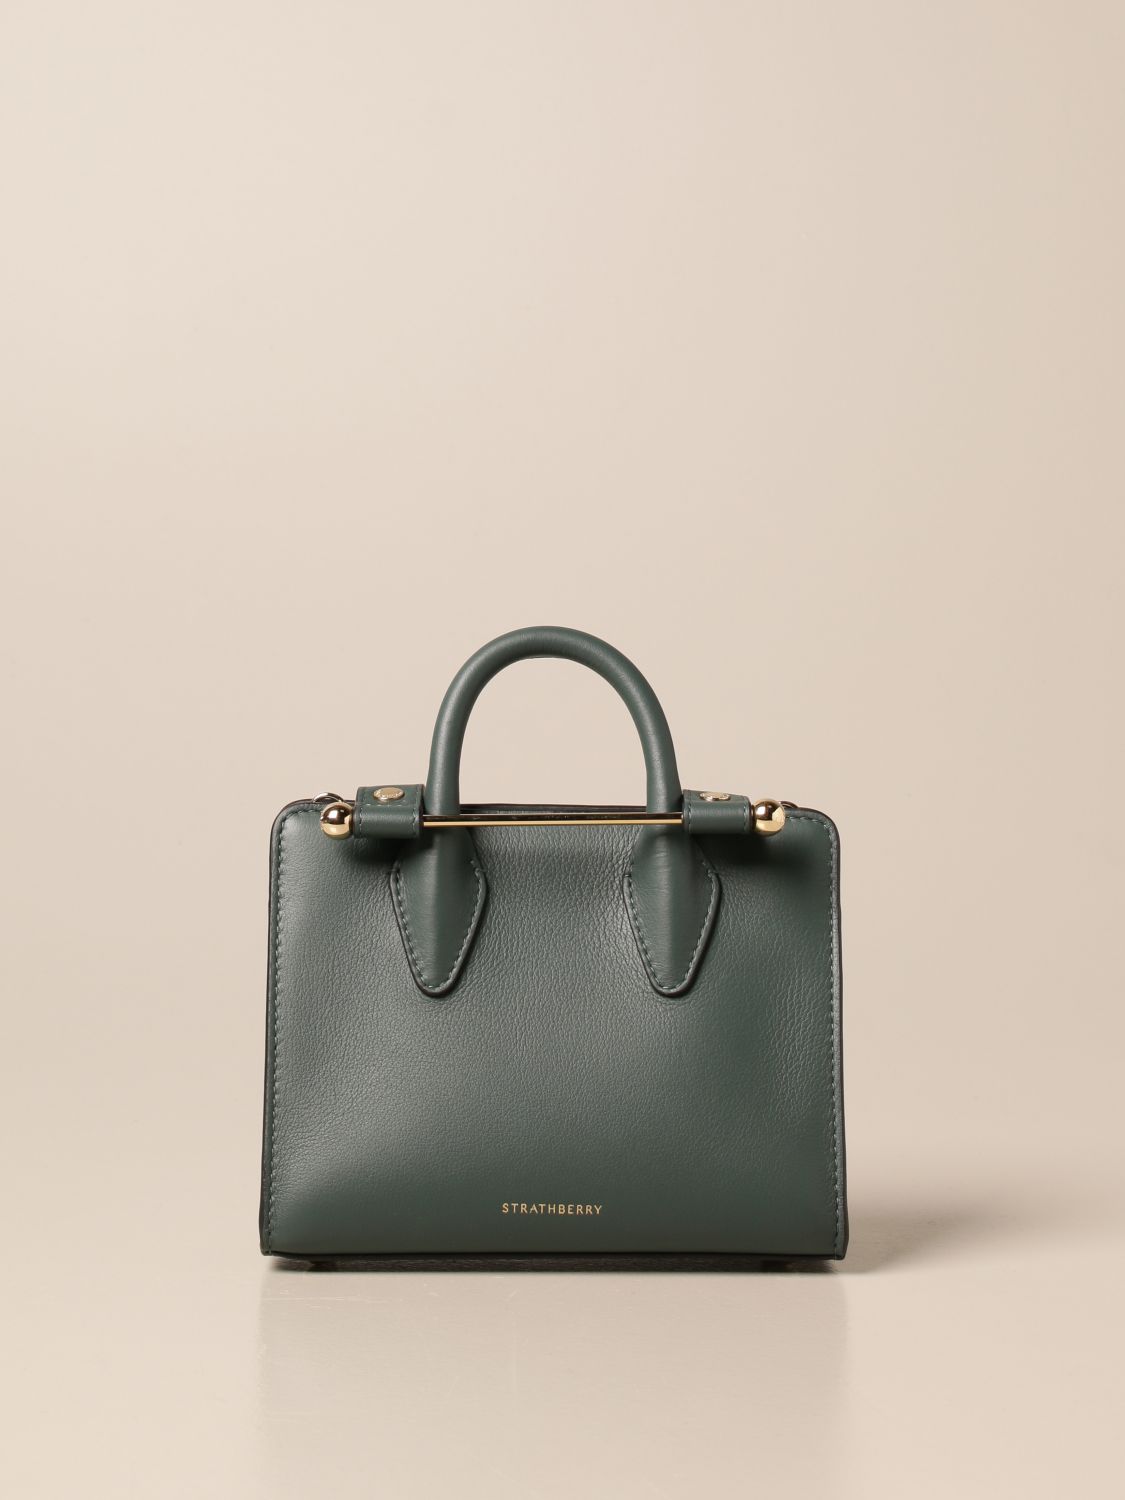 STRATHBERRY: Nano Tote leather bag - Bottle Green